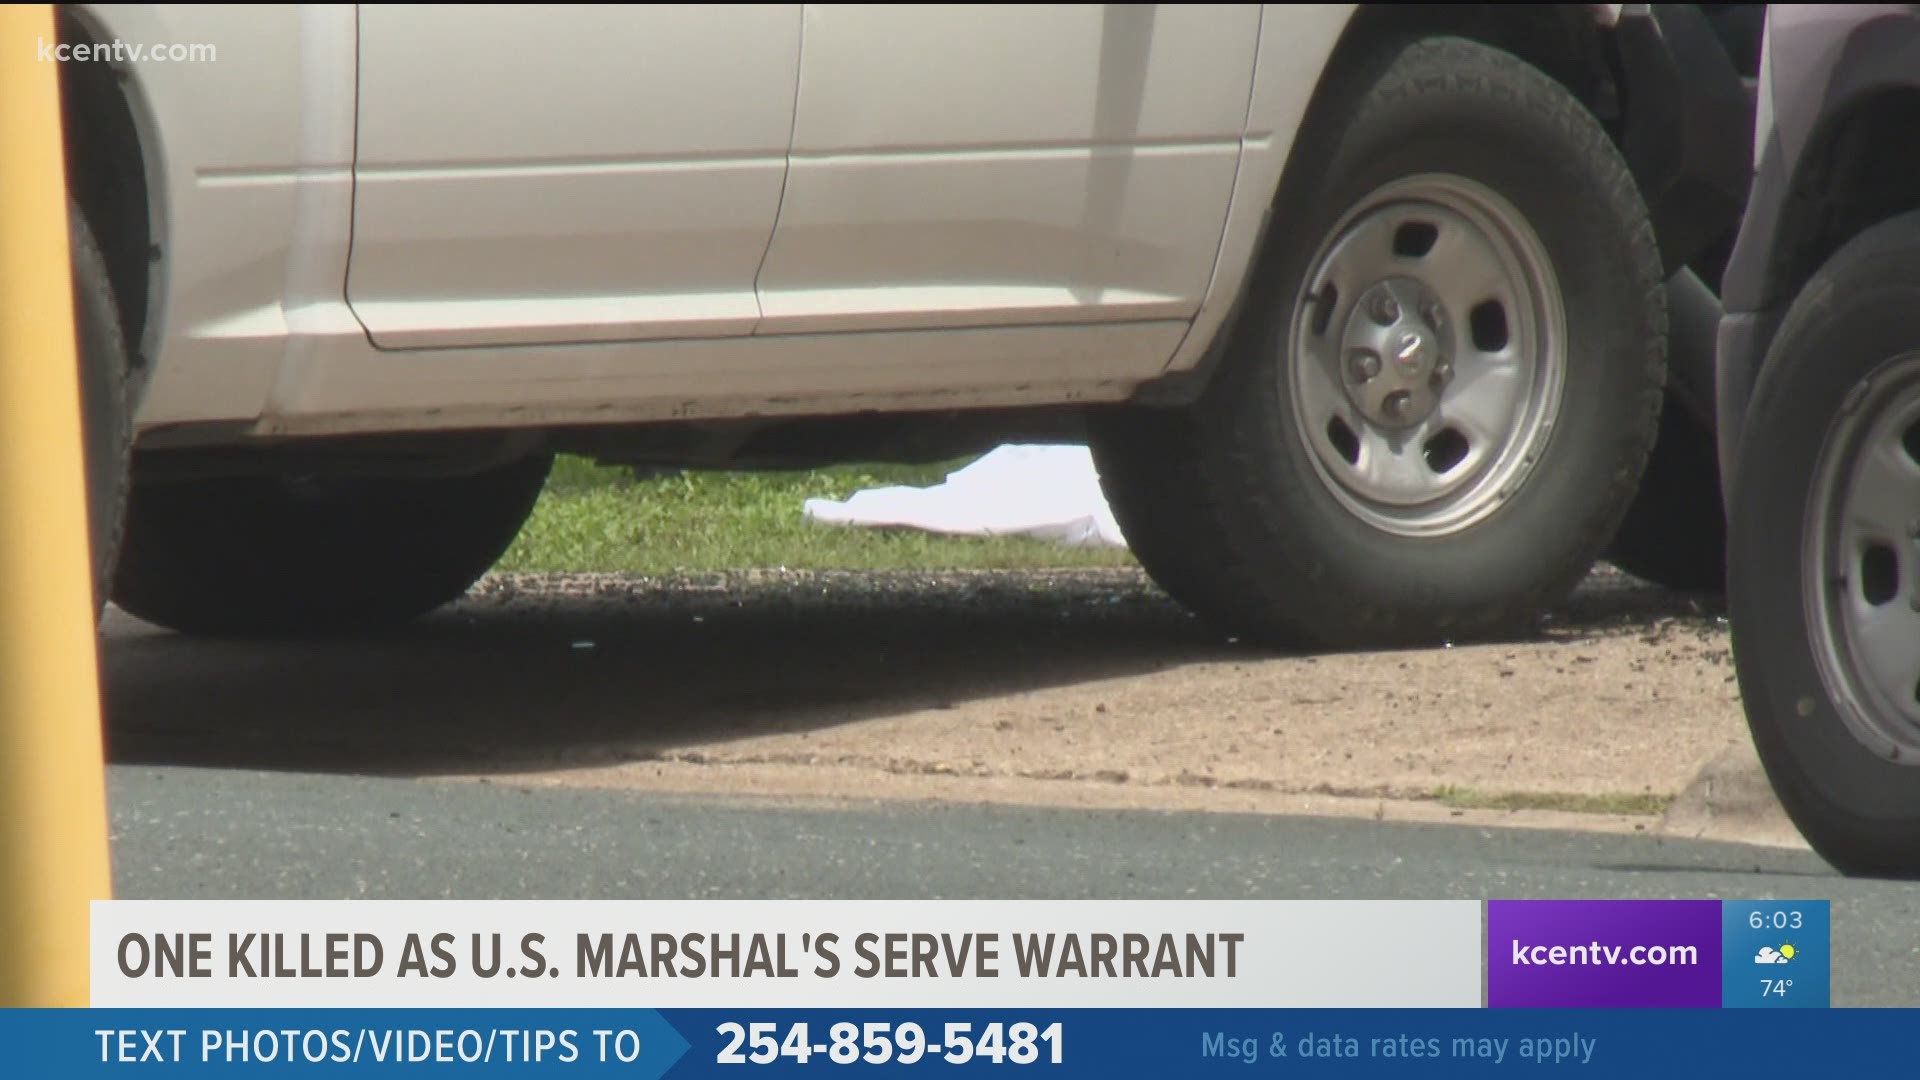 A spokeswoman for Killeen police said shots were fired as U.S. Marshals were attempting to serve a federal arrest warrant